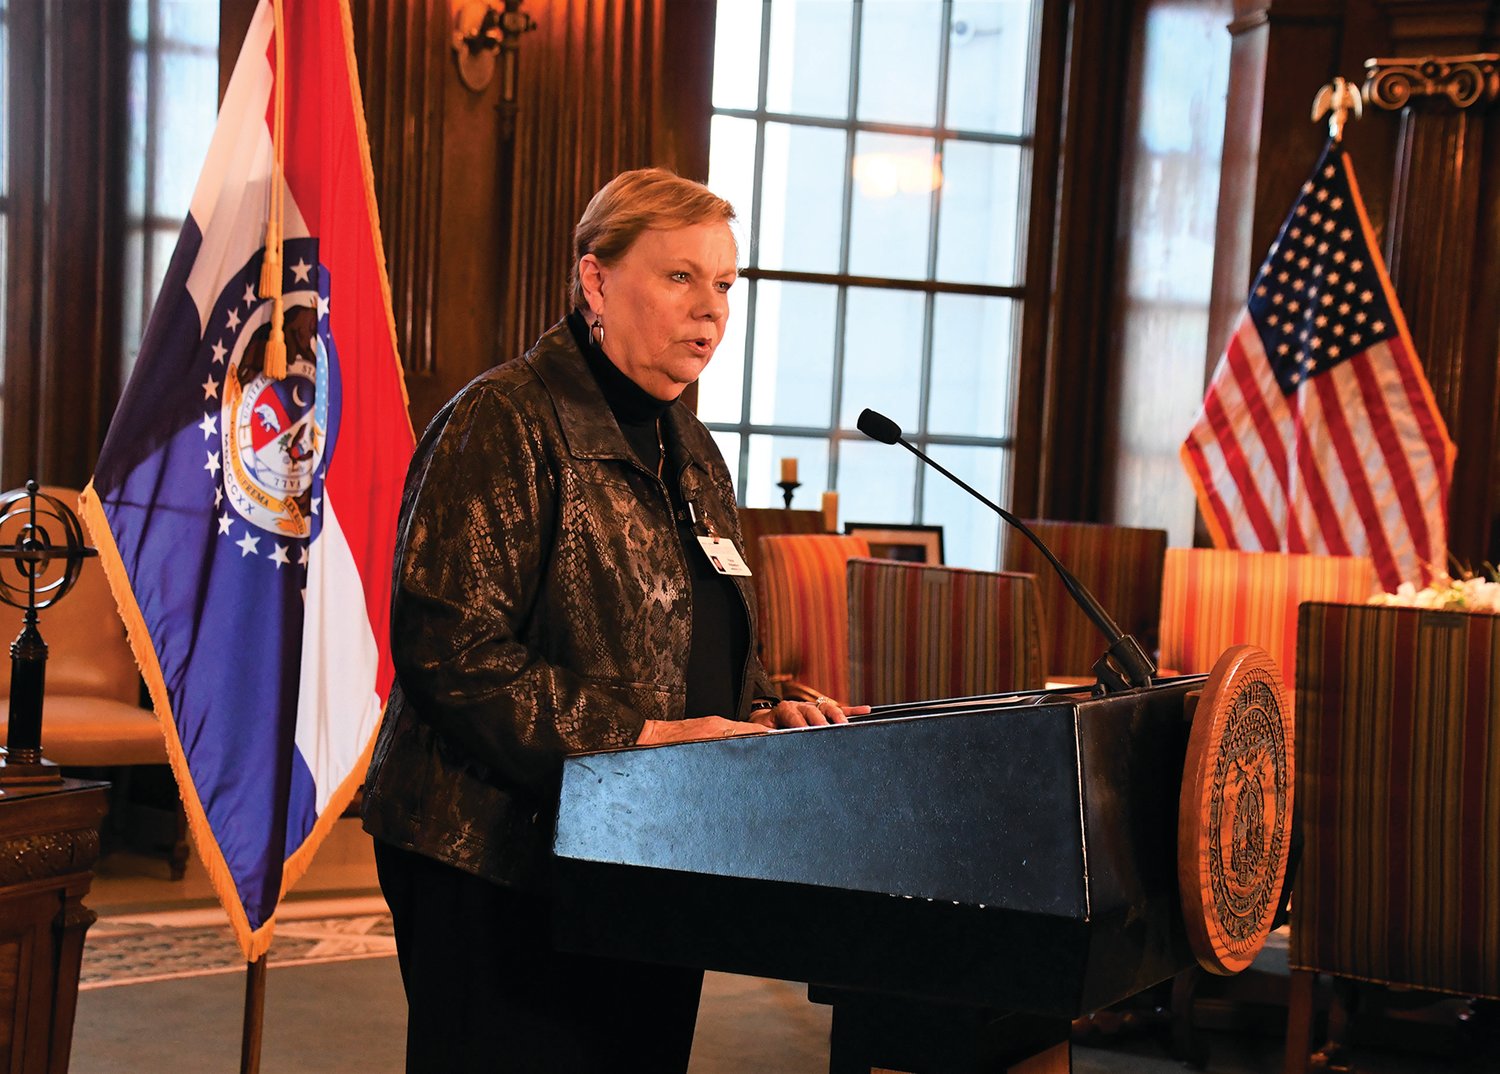 Paula Nickelson was introduced as the new acting director of the Missouri Department of Health and Senior Services on March 1. (photo courtesy of governor's office)